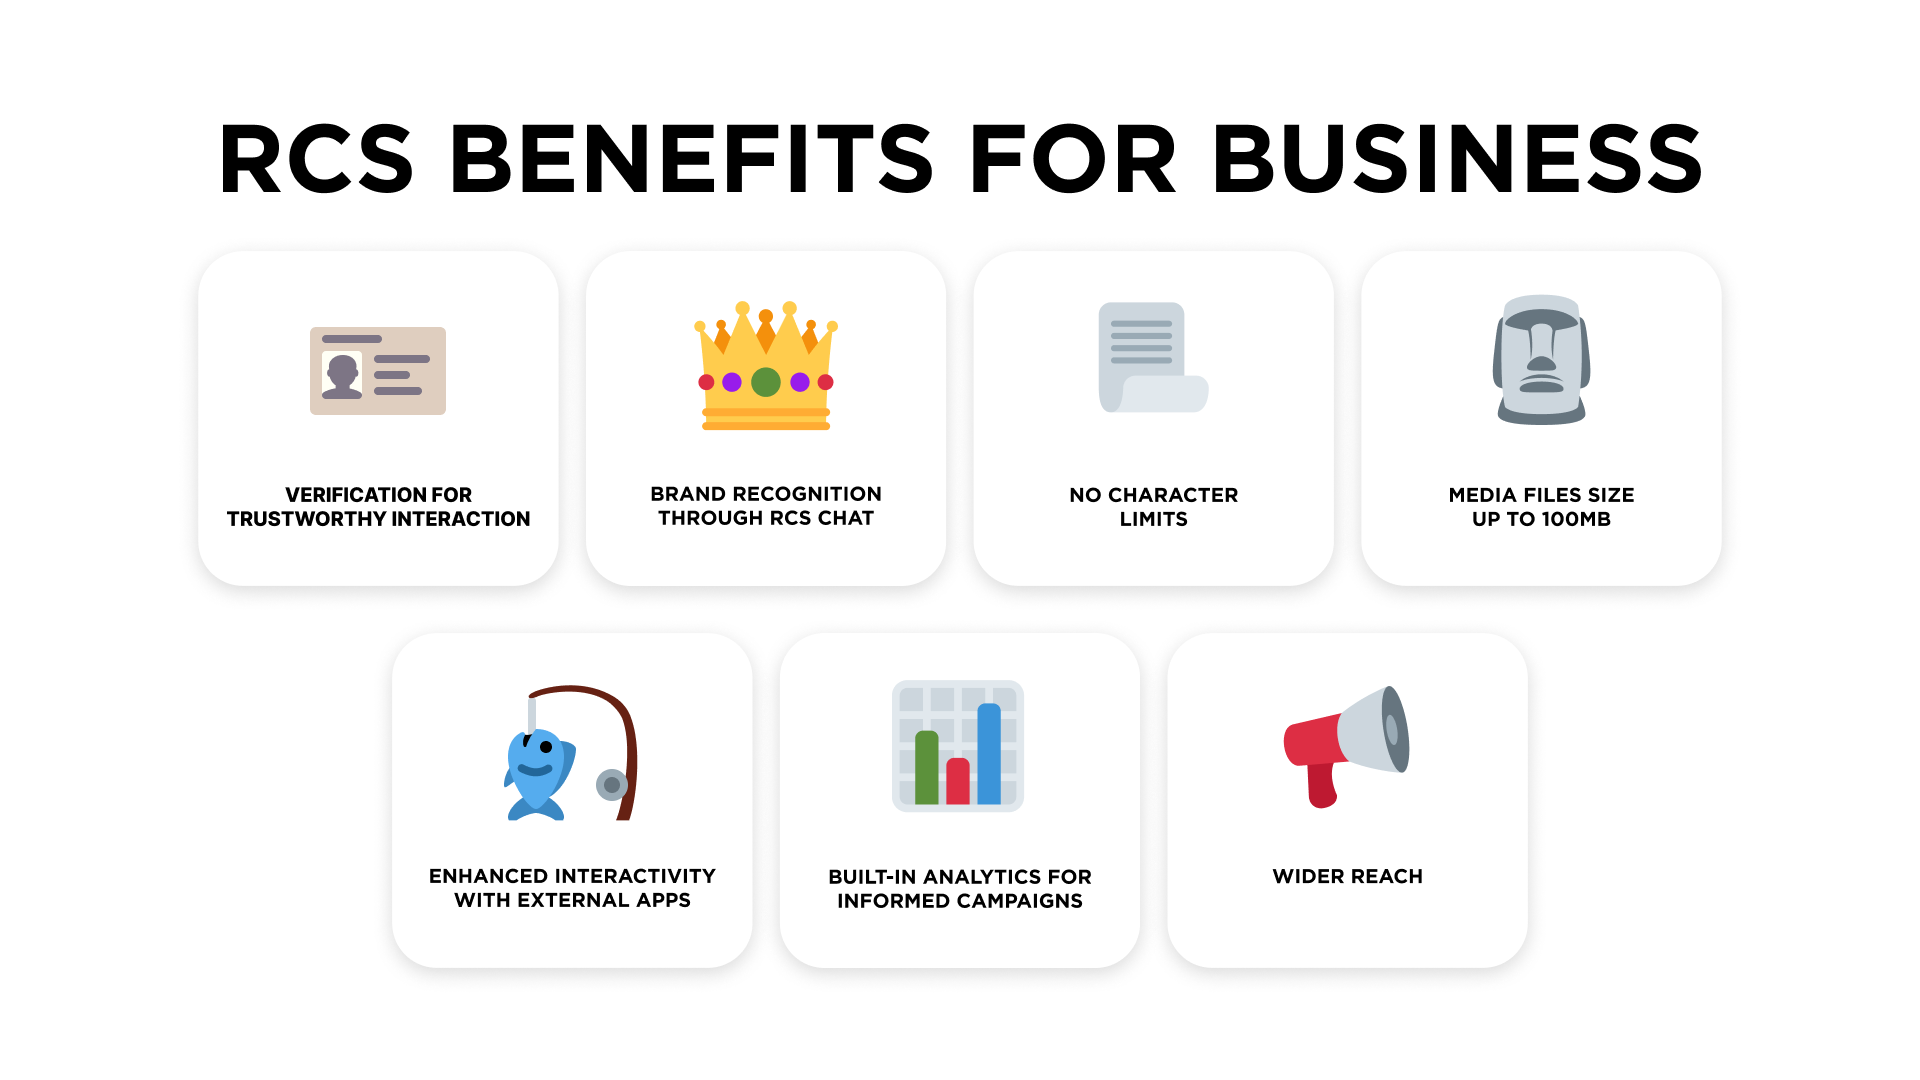 RCS benefits for business